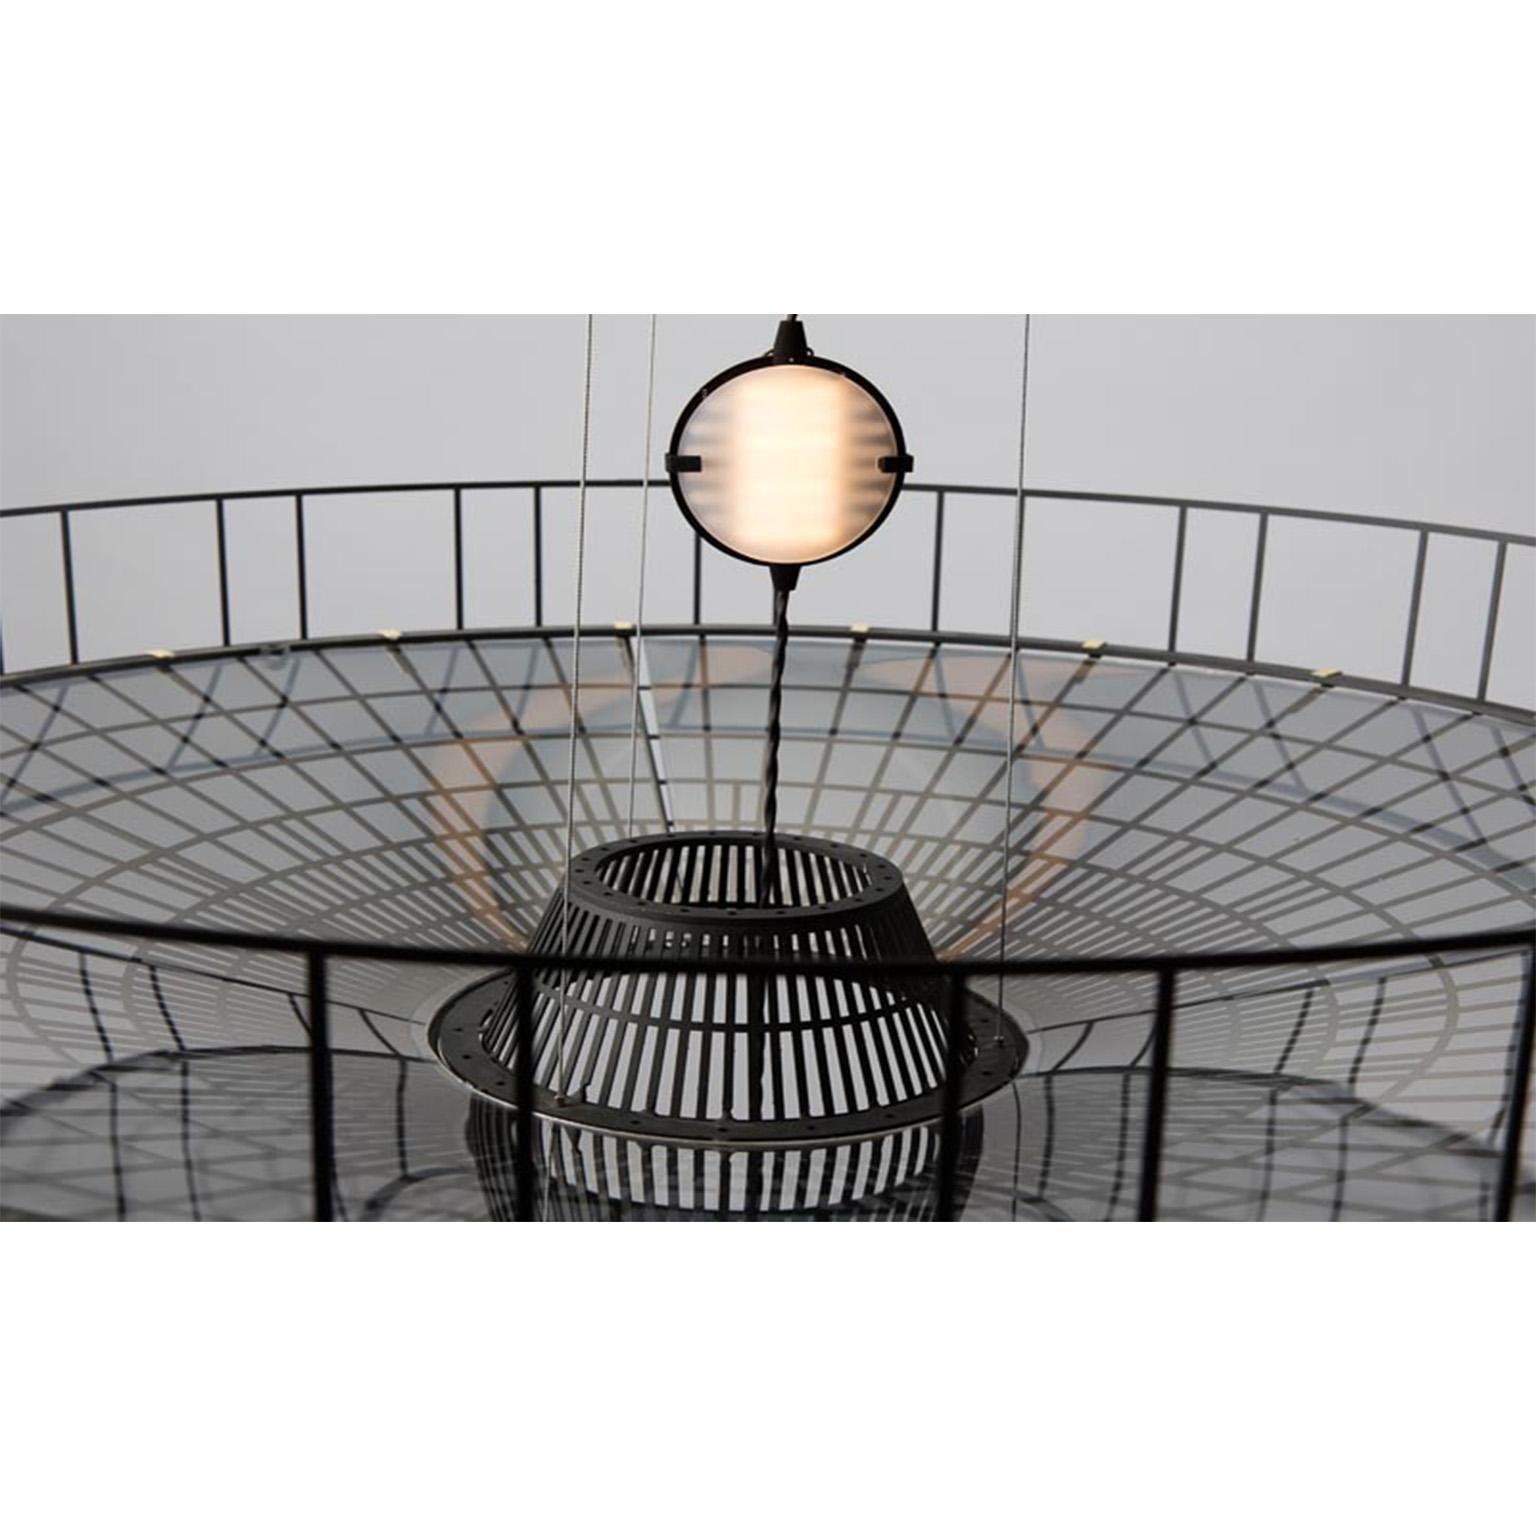 Art Deco Exploded View Lunar, Pendant Light, special handmade in Europe, by Vantot